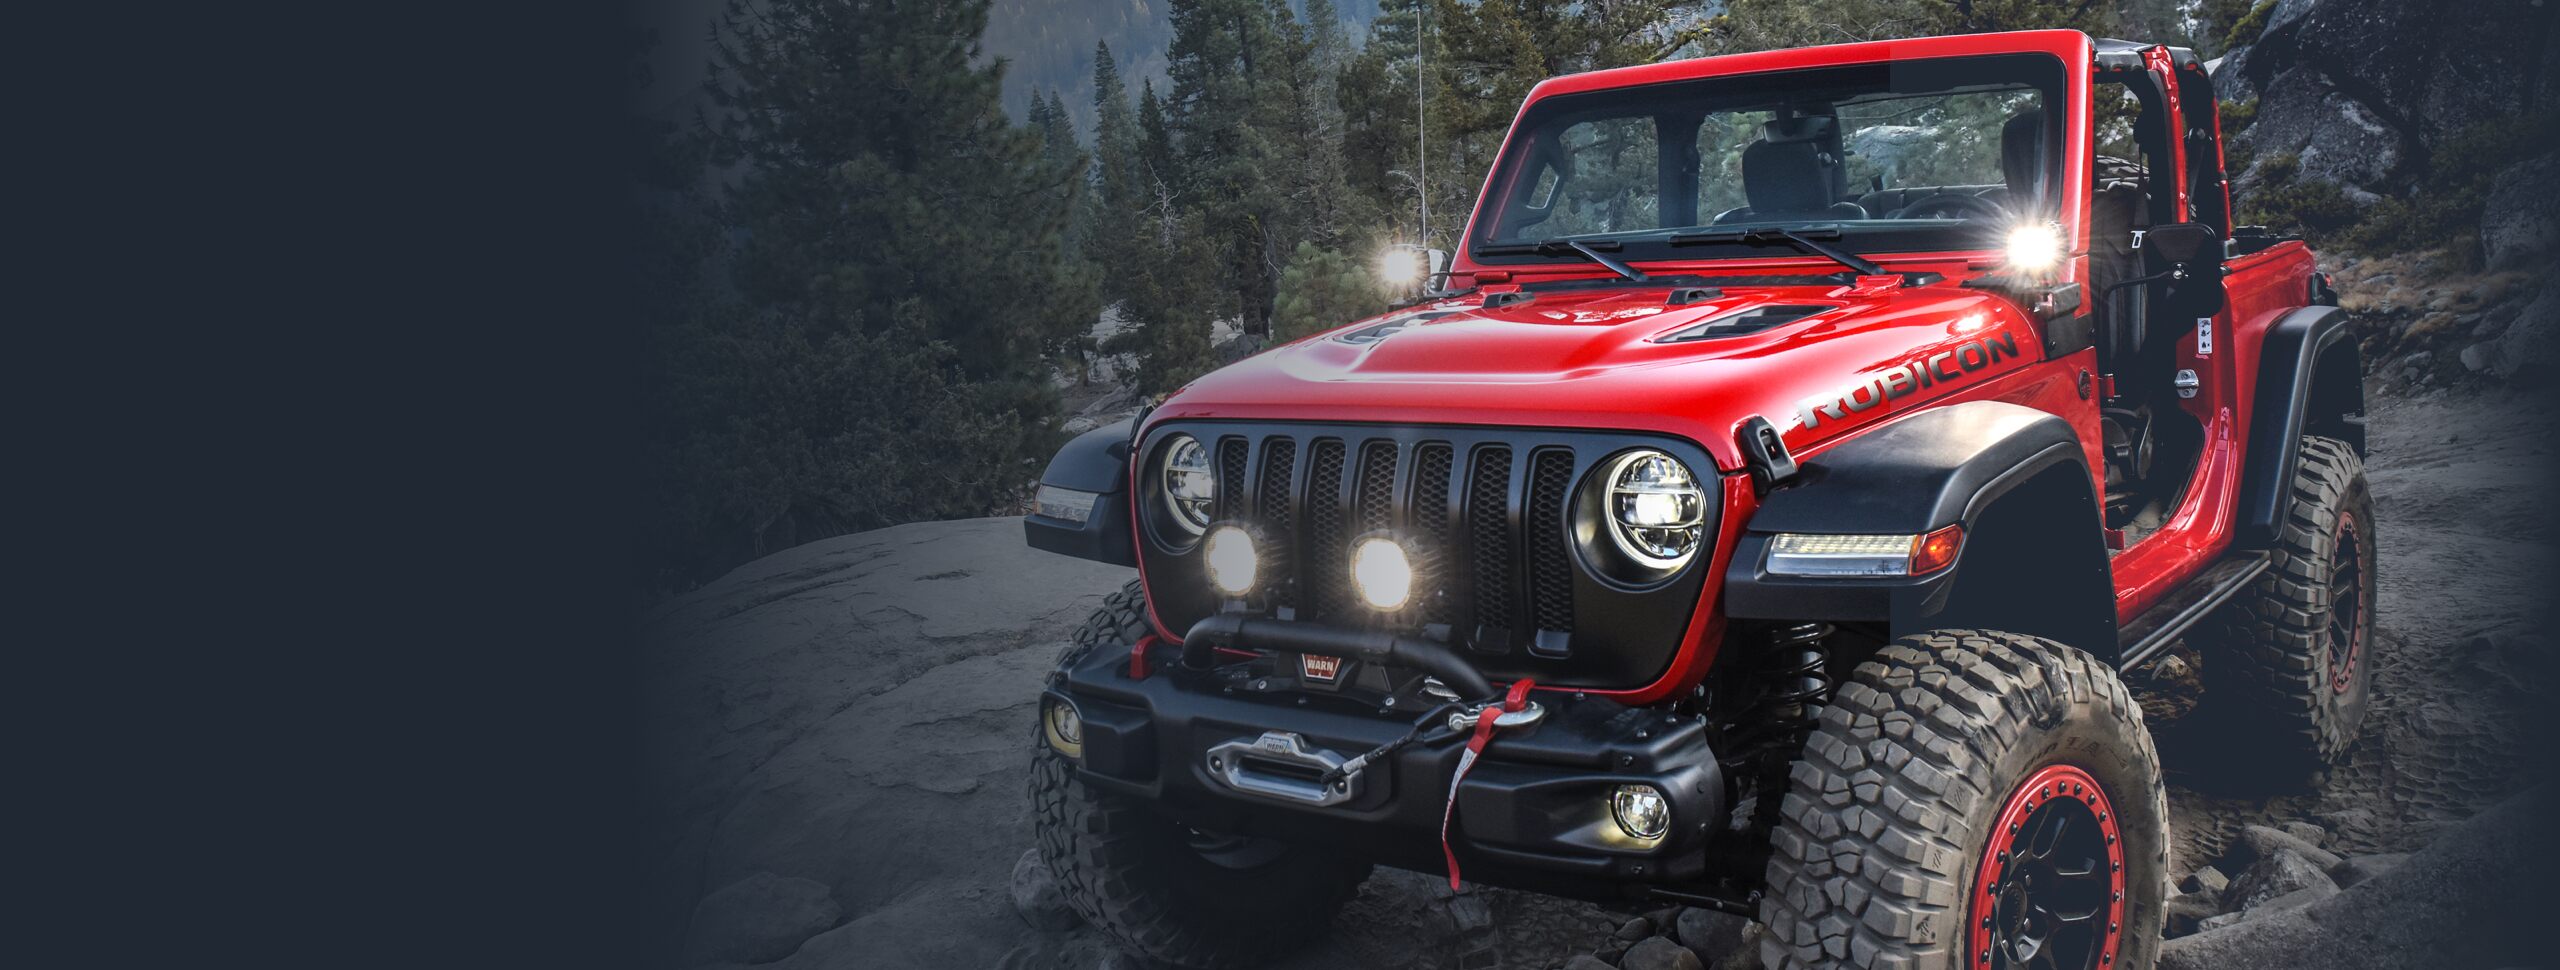 The 2022 Jeep Wrangler Rubicon being driven off-road. It has been equipped with aftermarket lighting on its grille and at the base of its windshield.